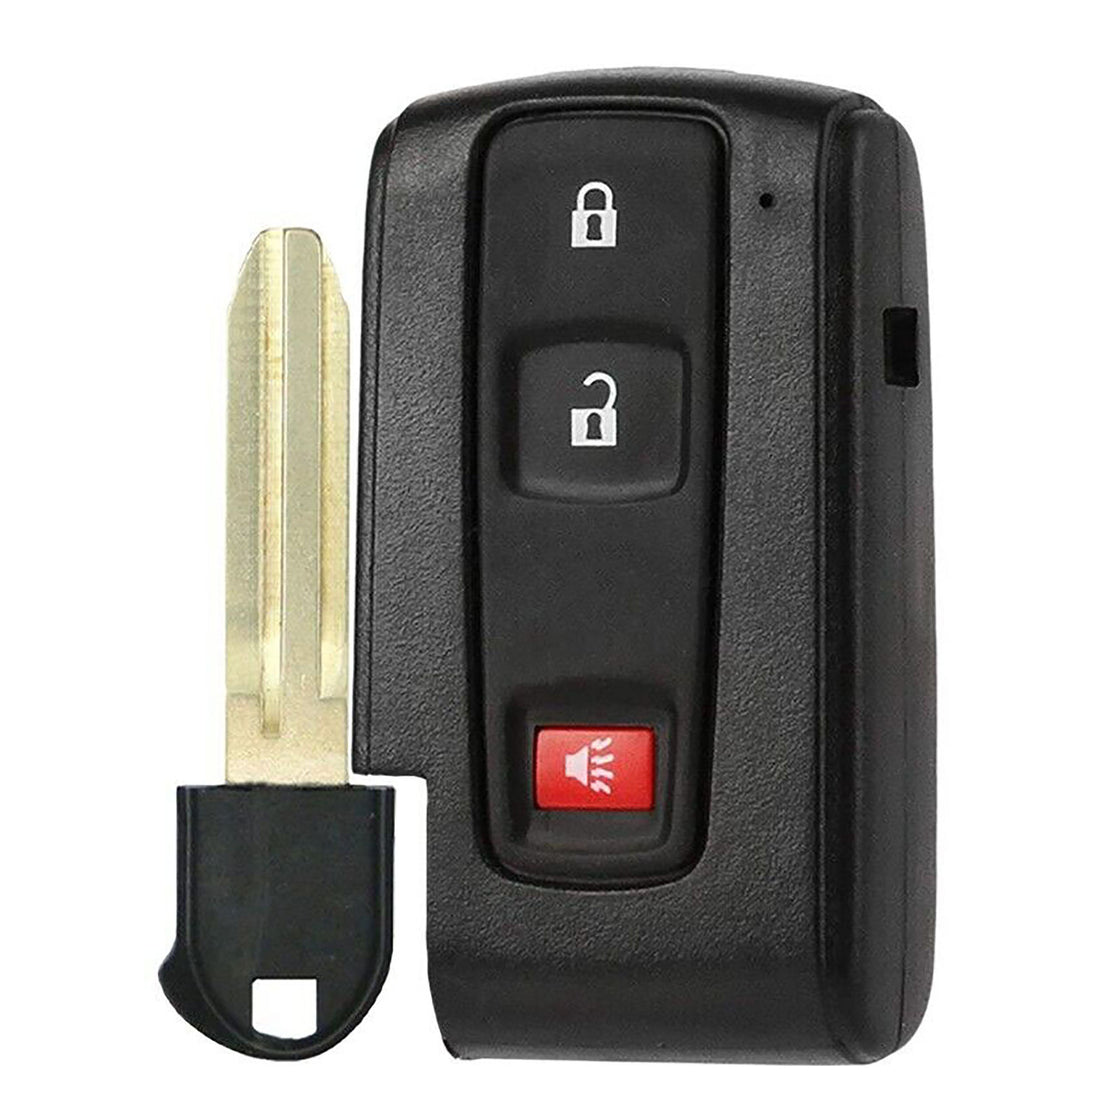 1x New Replacement Proximity Key Fob Compatible with & Fit For 2004-2009 Toyota Prius Read Description - MPN MOZB31EG-02